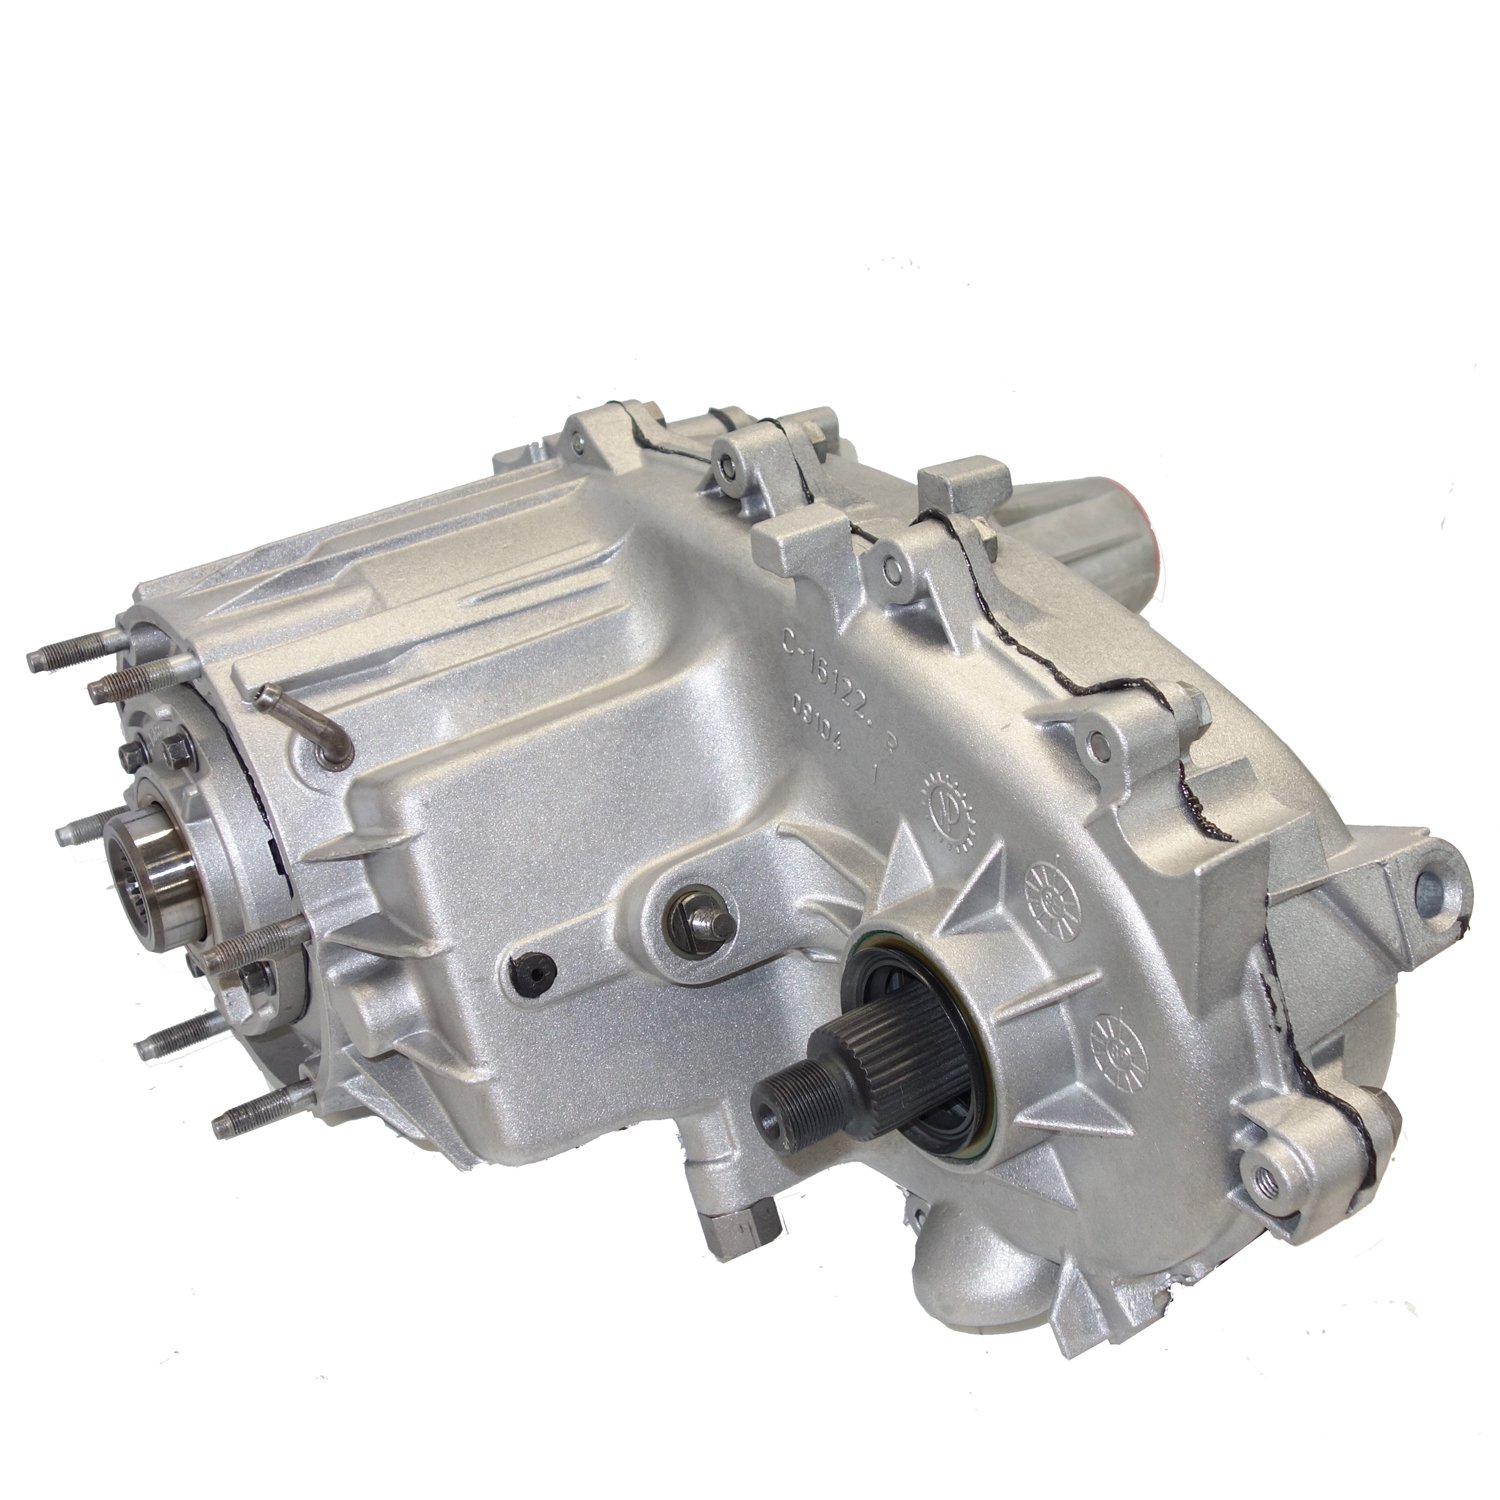 Remanufactured NP242 Transfer Case for Jeep 93-95 Grand Cherokee